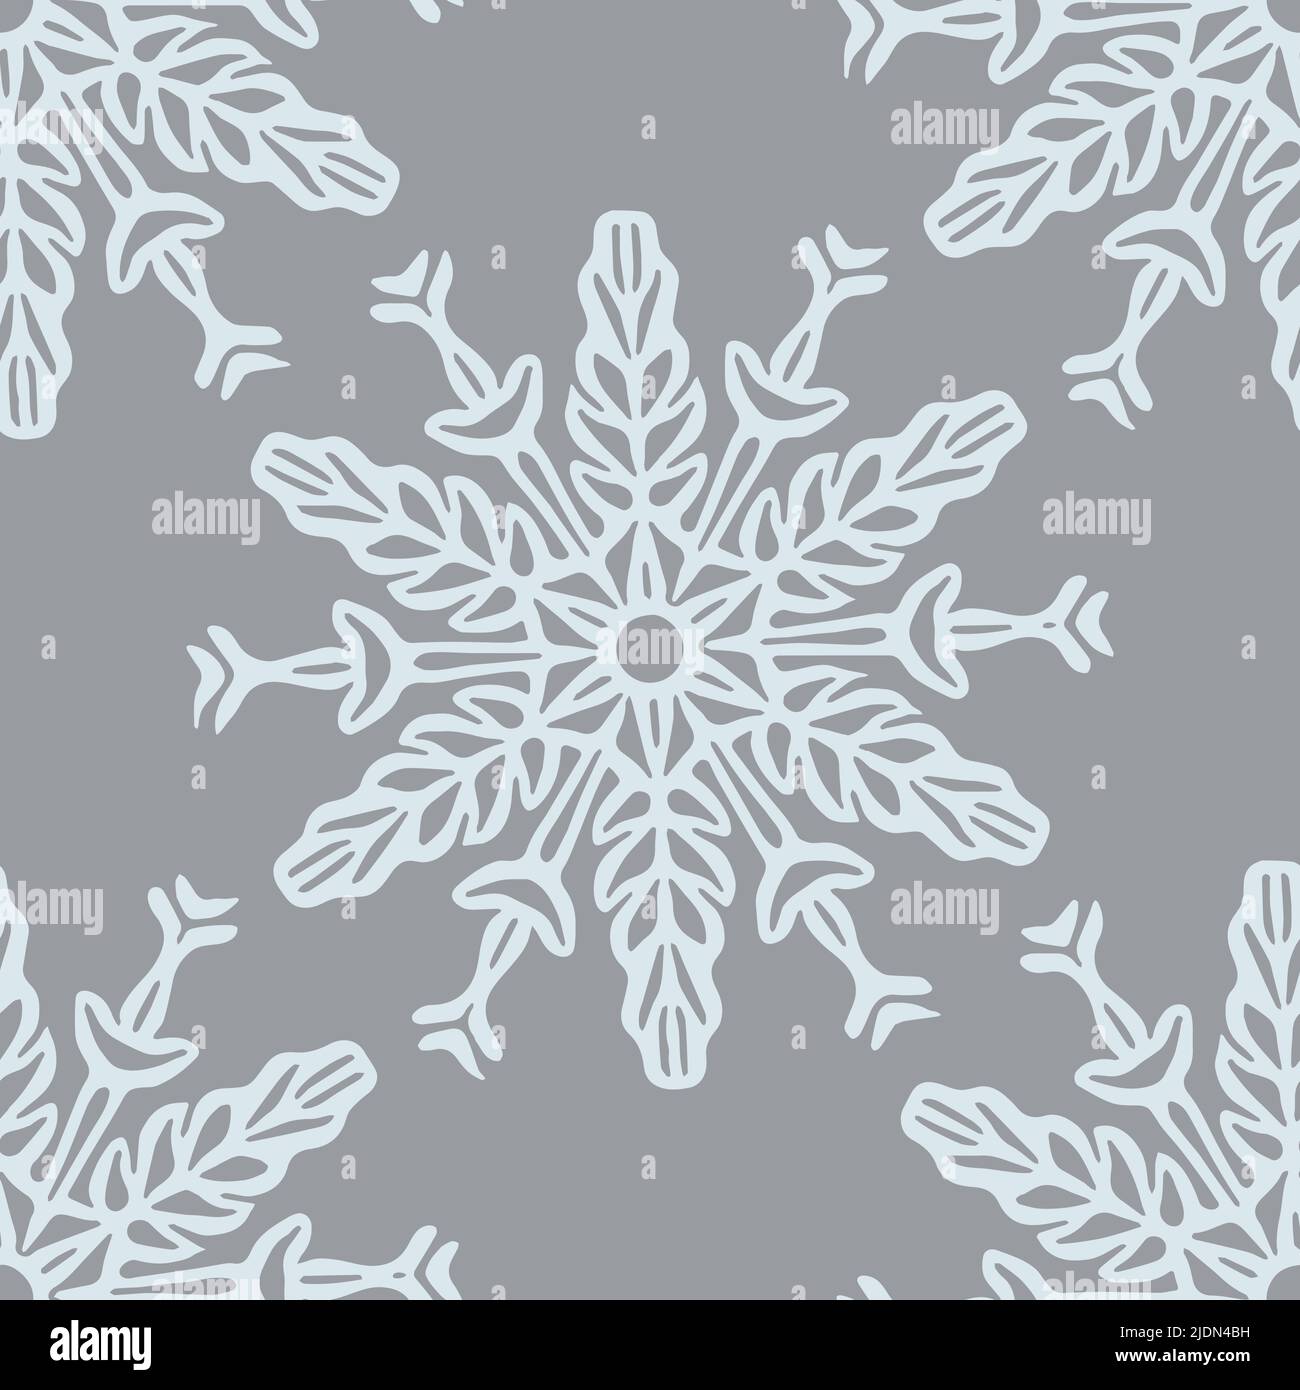 Premium Vector  Hand drawn simple seamless pattern with snowflakes  christmas vector for wrapping paper fabric print background design